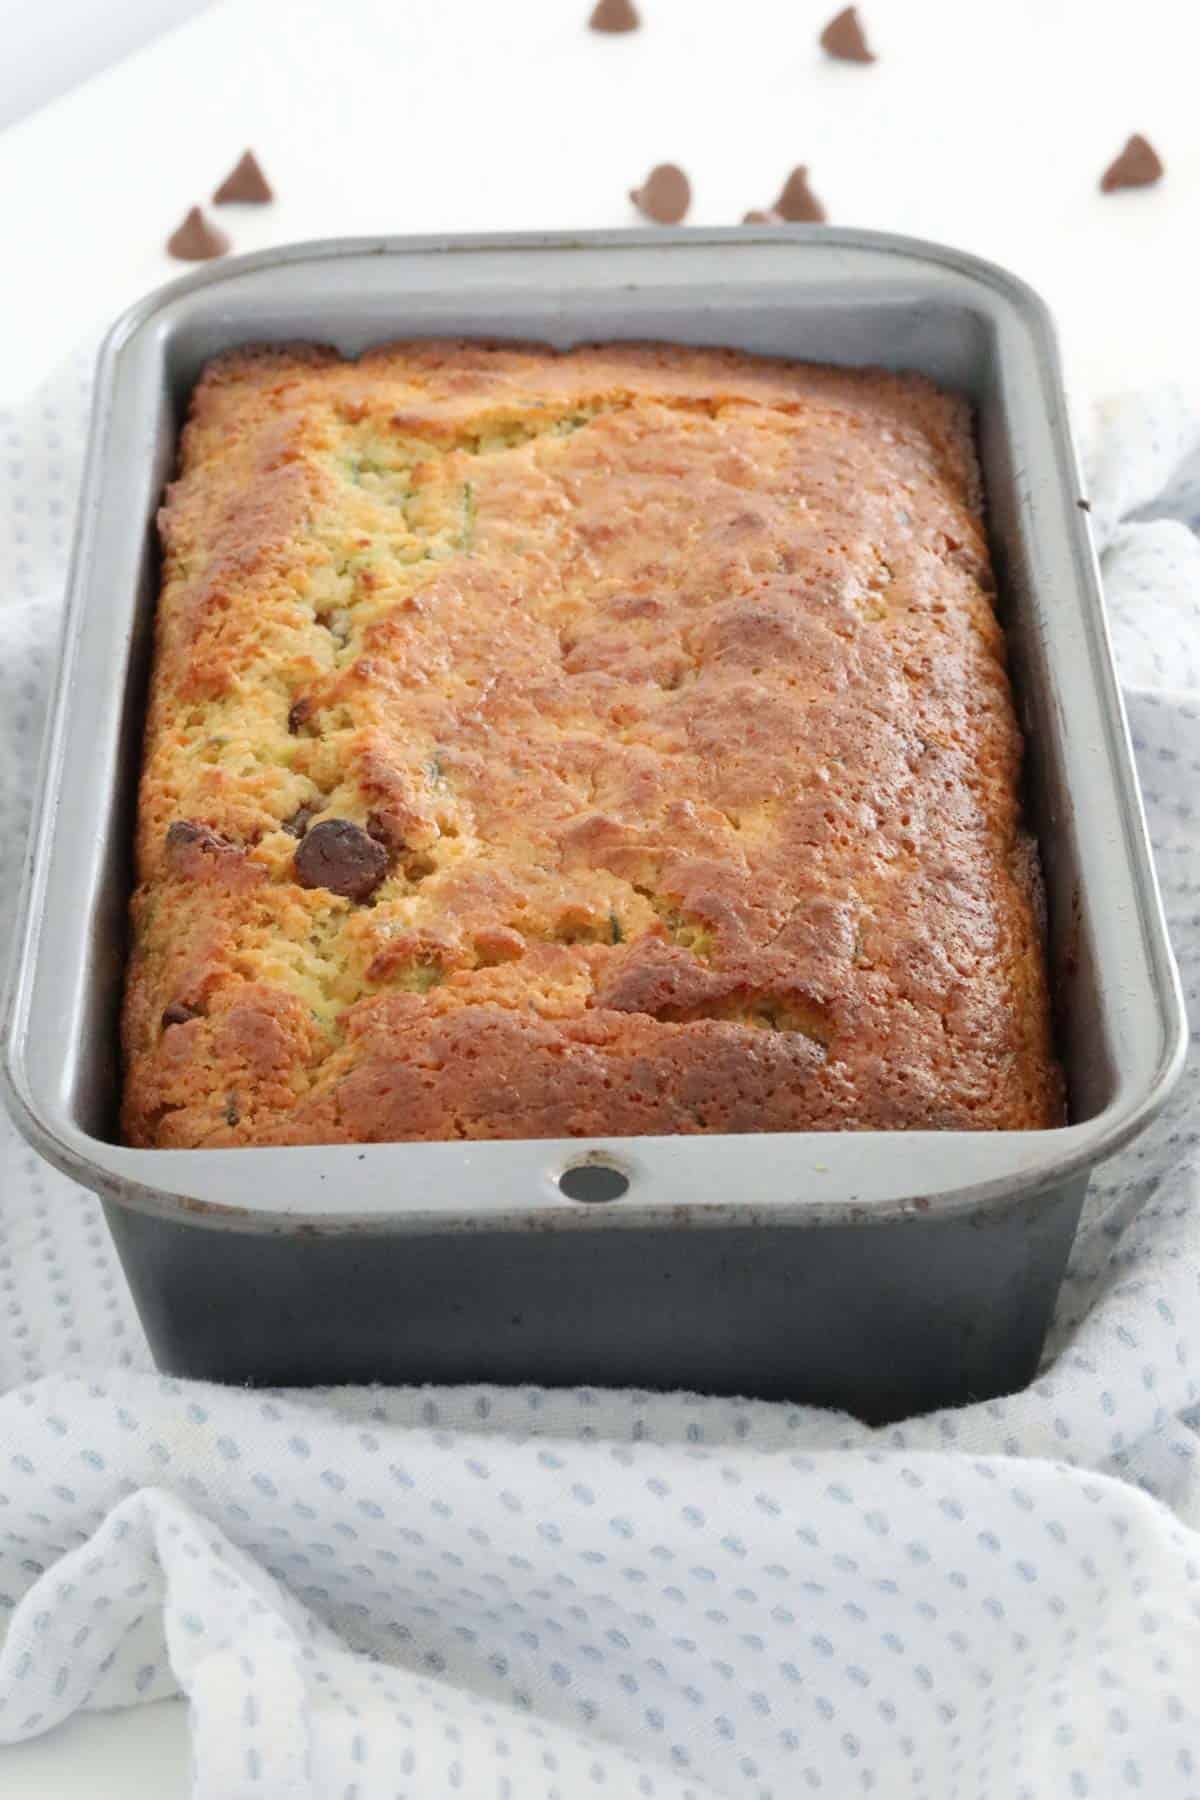 Finished zucchini bread in a loaf tin.